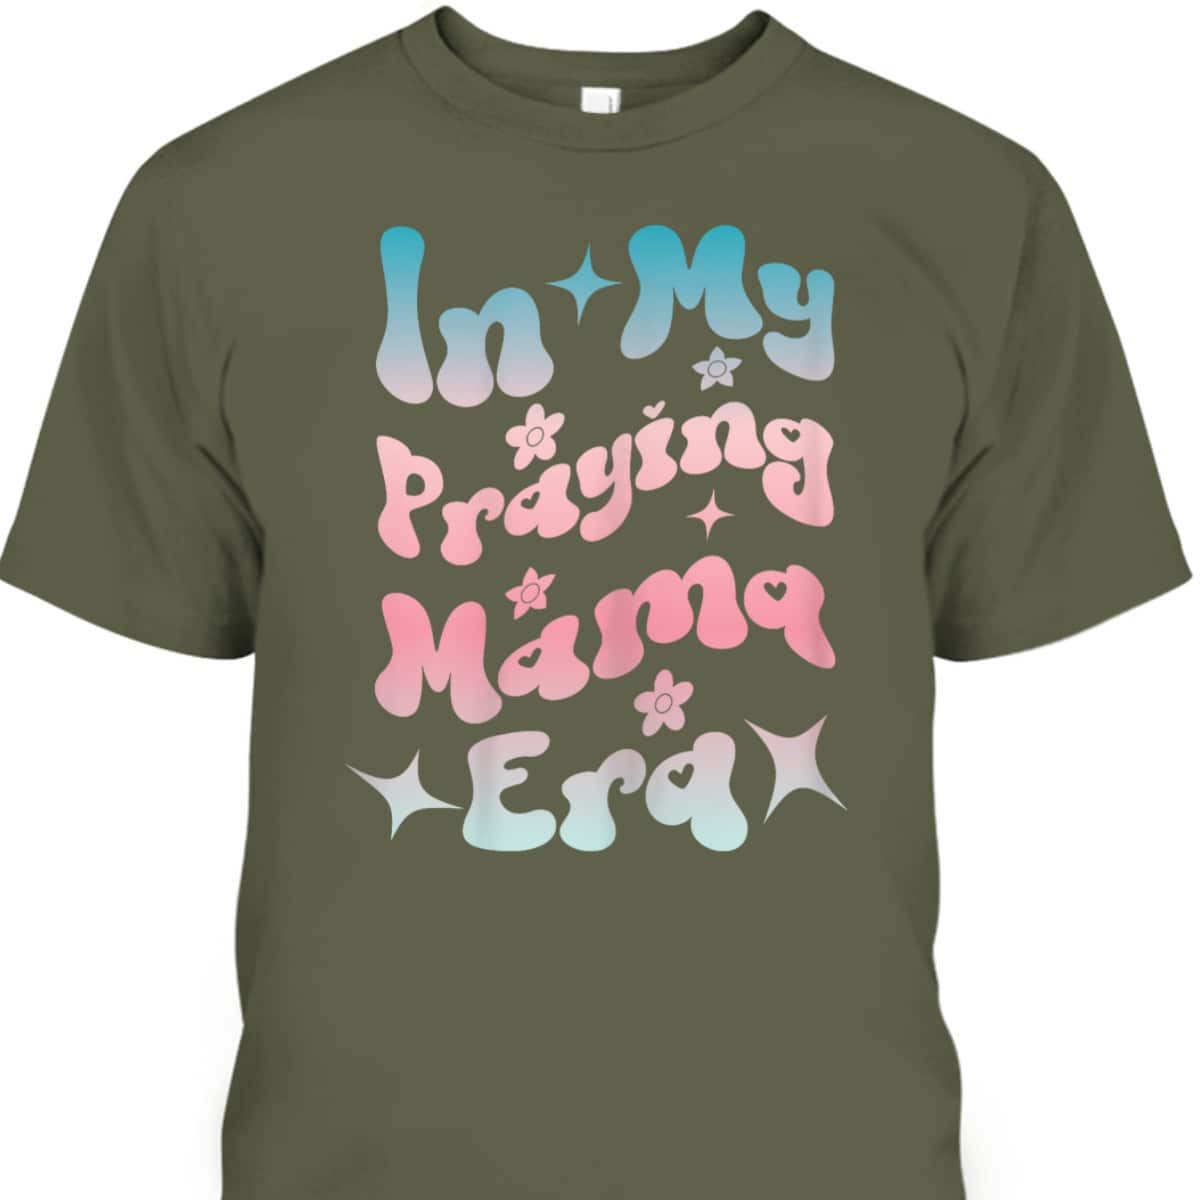 In My Praying Mama Era Religious Christian Mother's Day T-Shirt